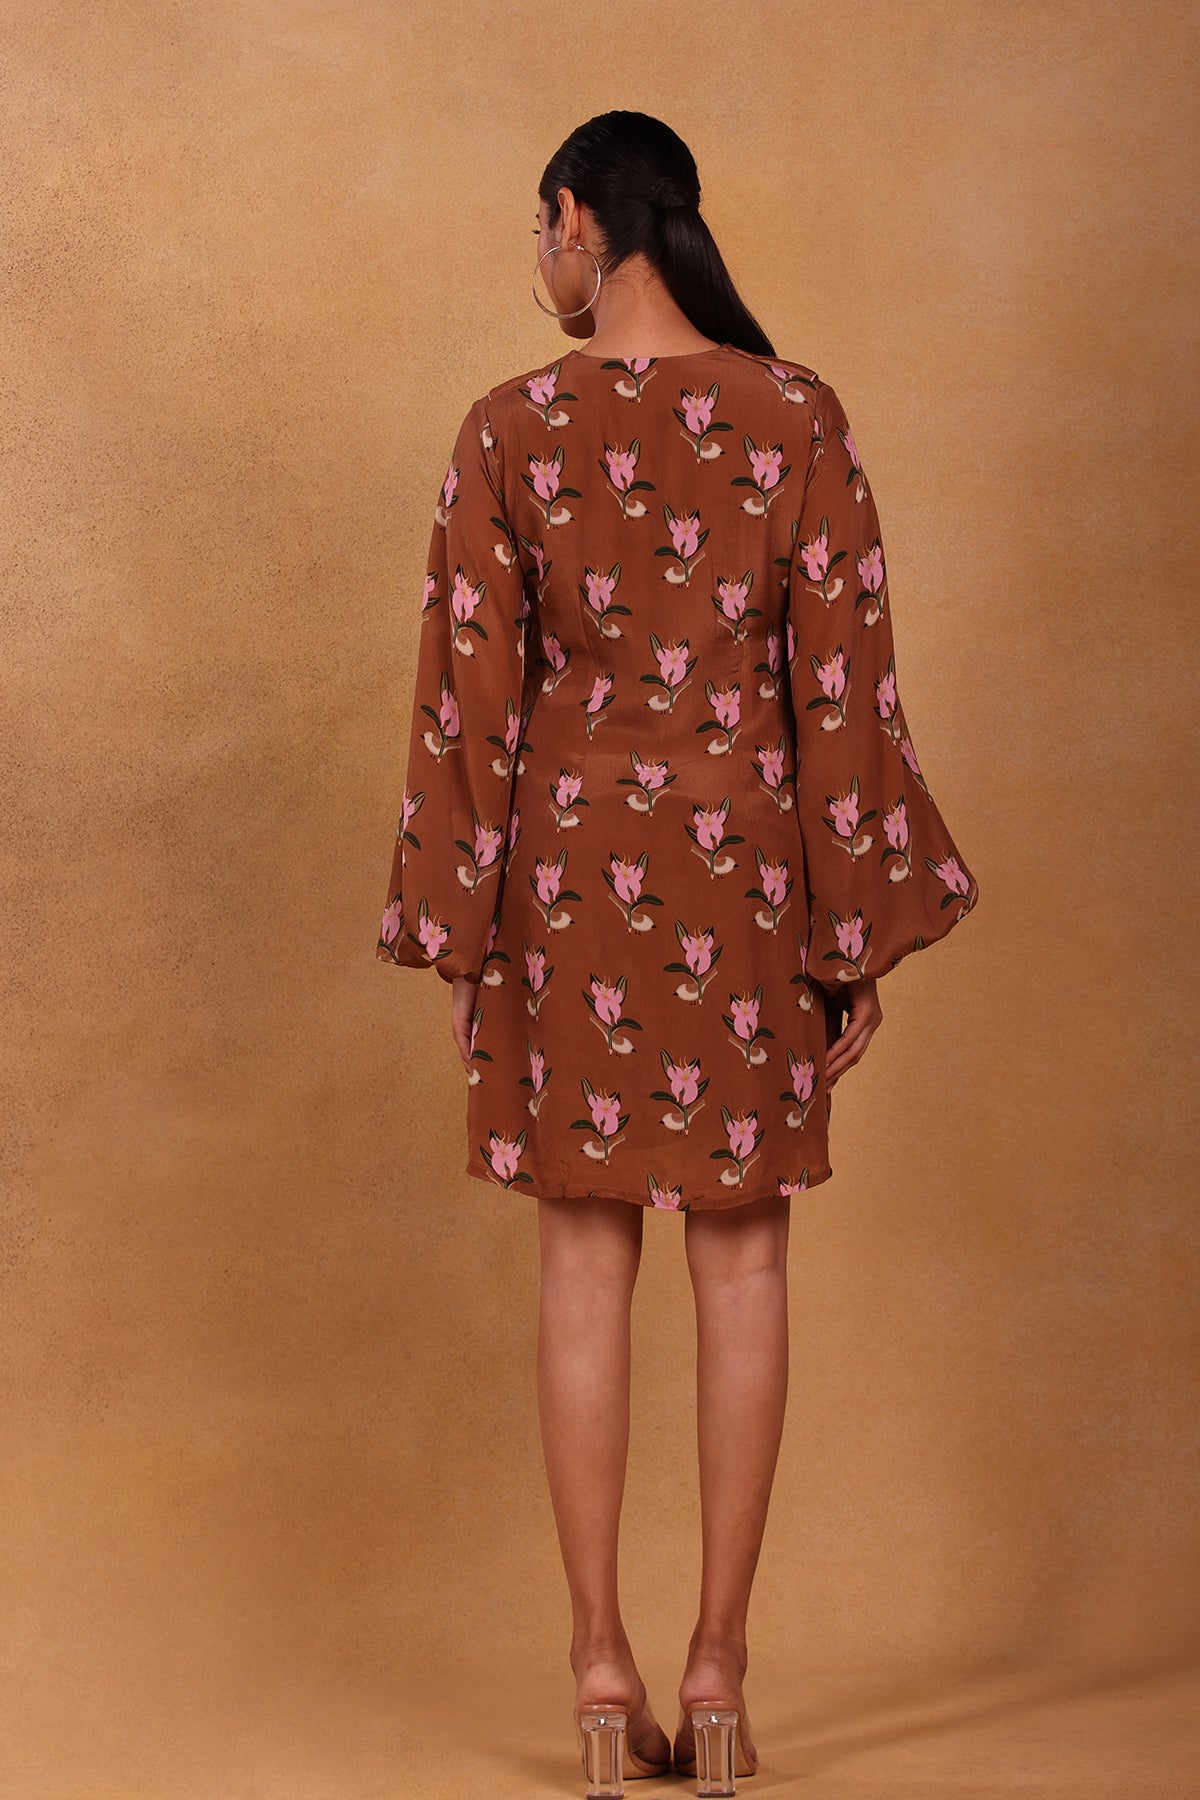 Brown Canary Blossom Peter Pan Dress